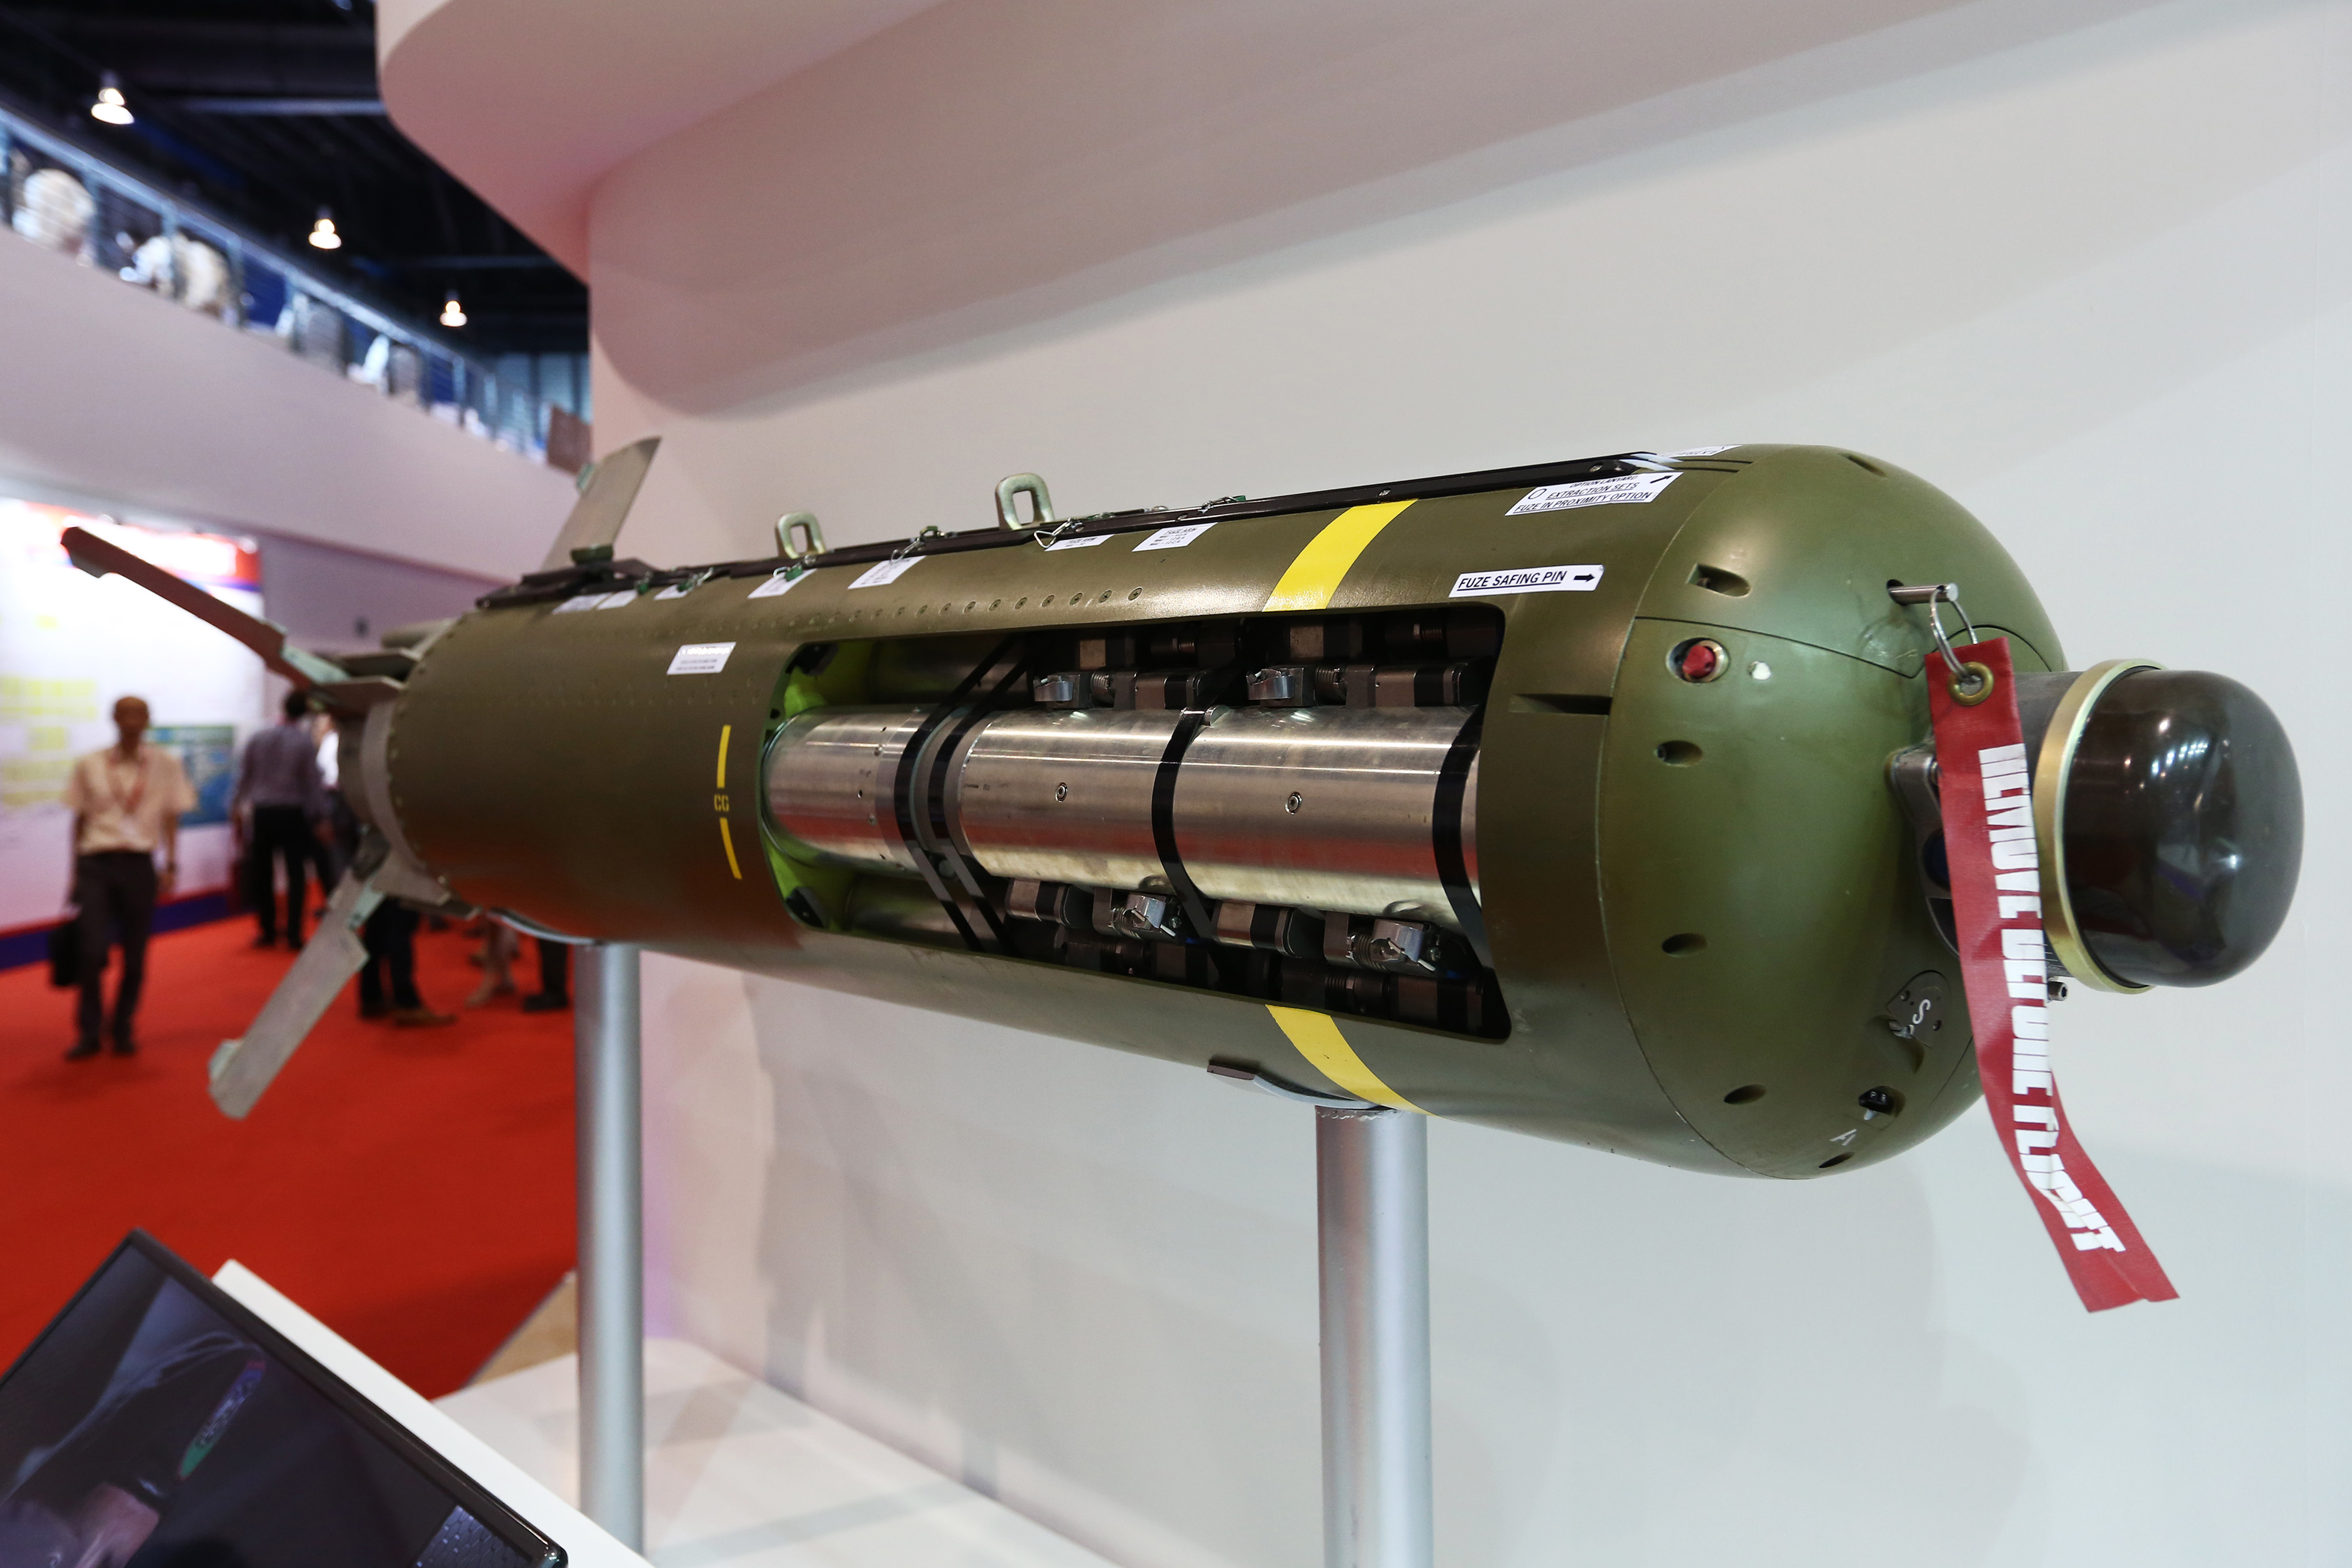 A Textron Systems CBU-105 sensor fused weapon sits on display at the Singapore Airshow on Wednesday. | BLOOMBERG